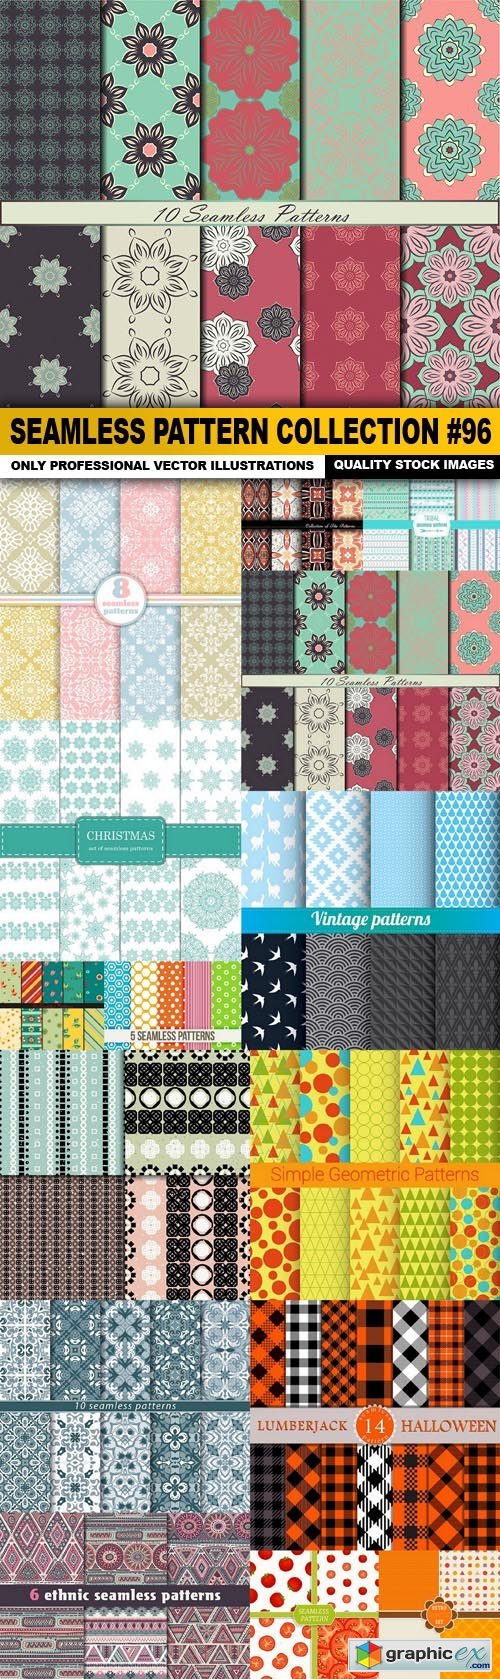 Seamless Pattern Collection #96 - 15 Vector